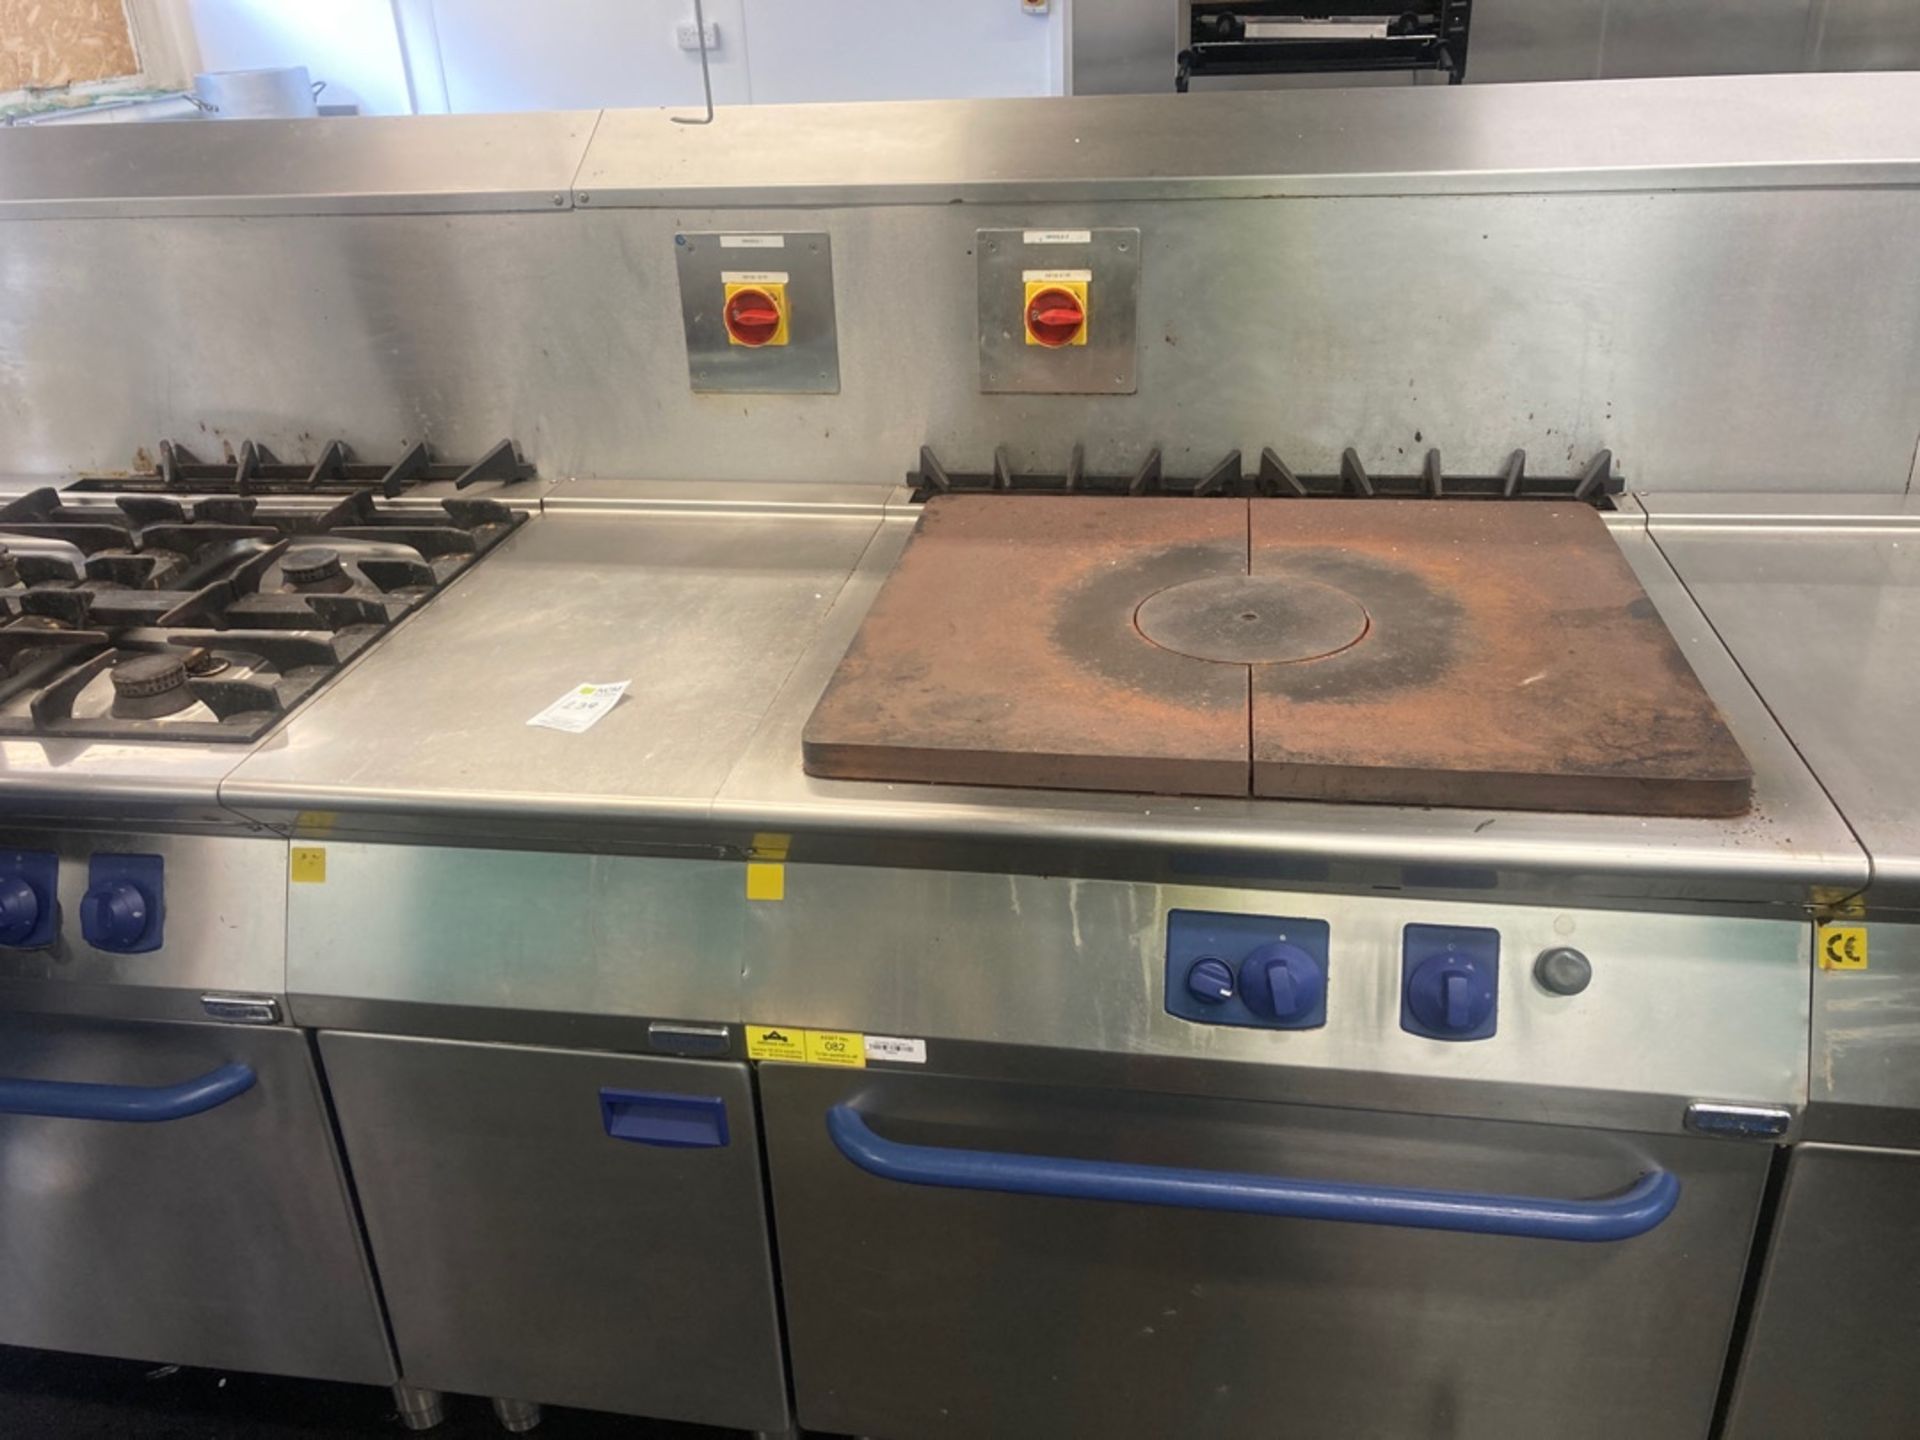 Electrolux Hot plate